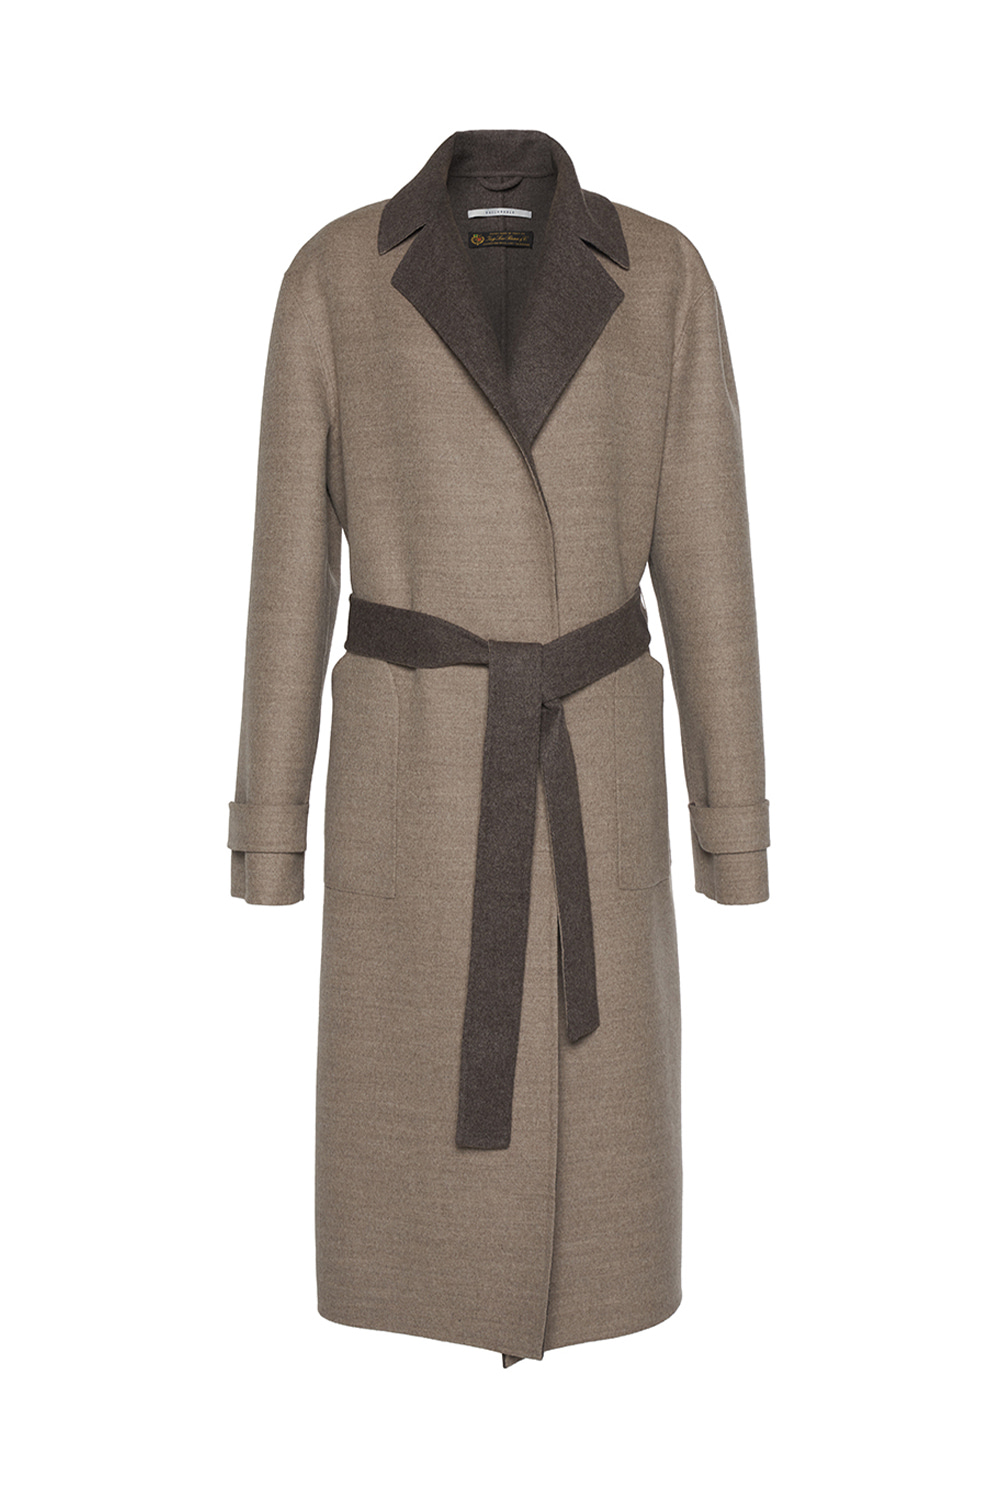 Adagio Double face cashemere blended wool coat | tailorable